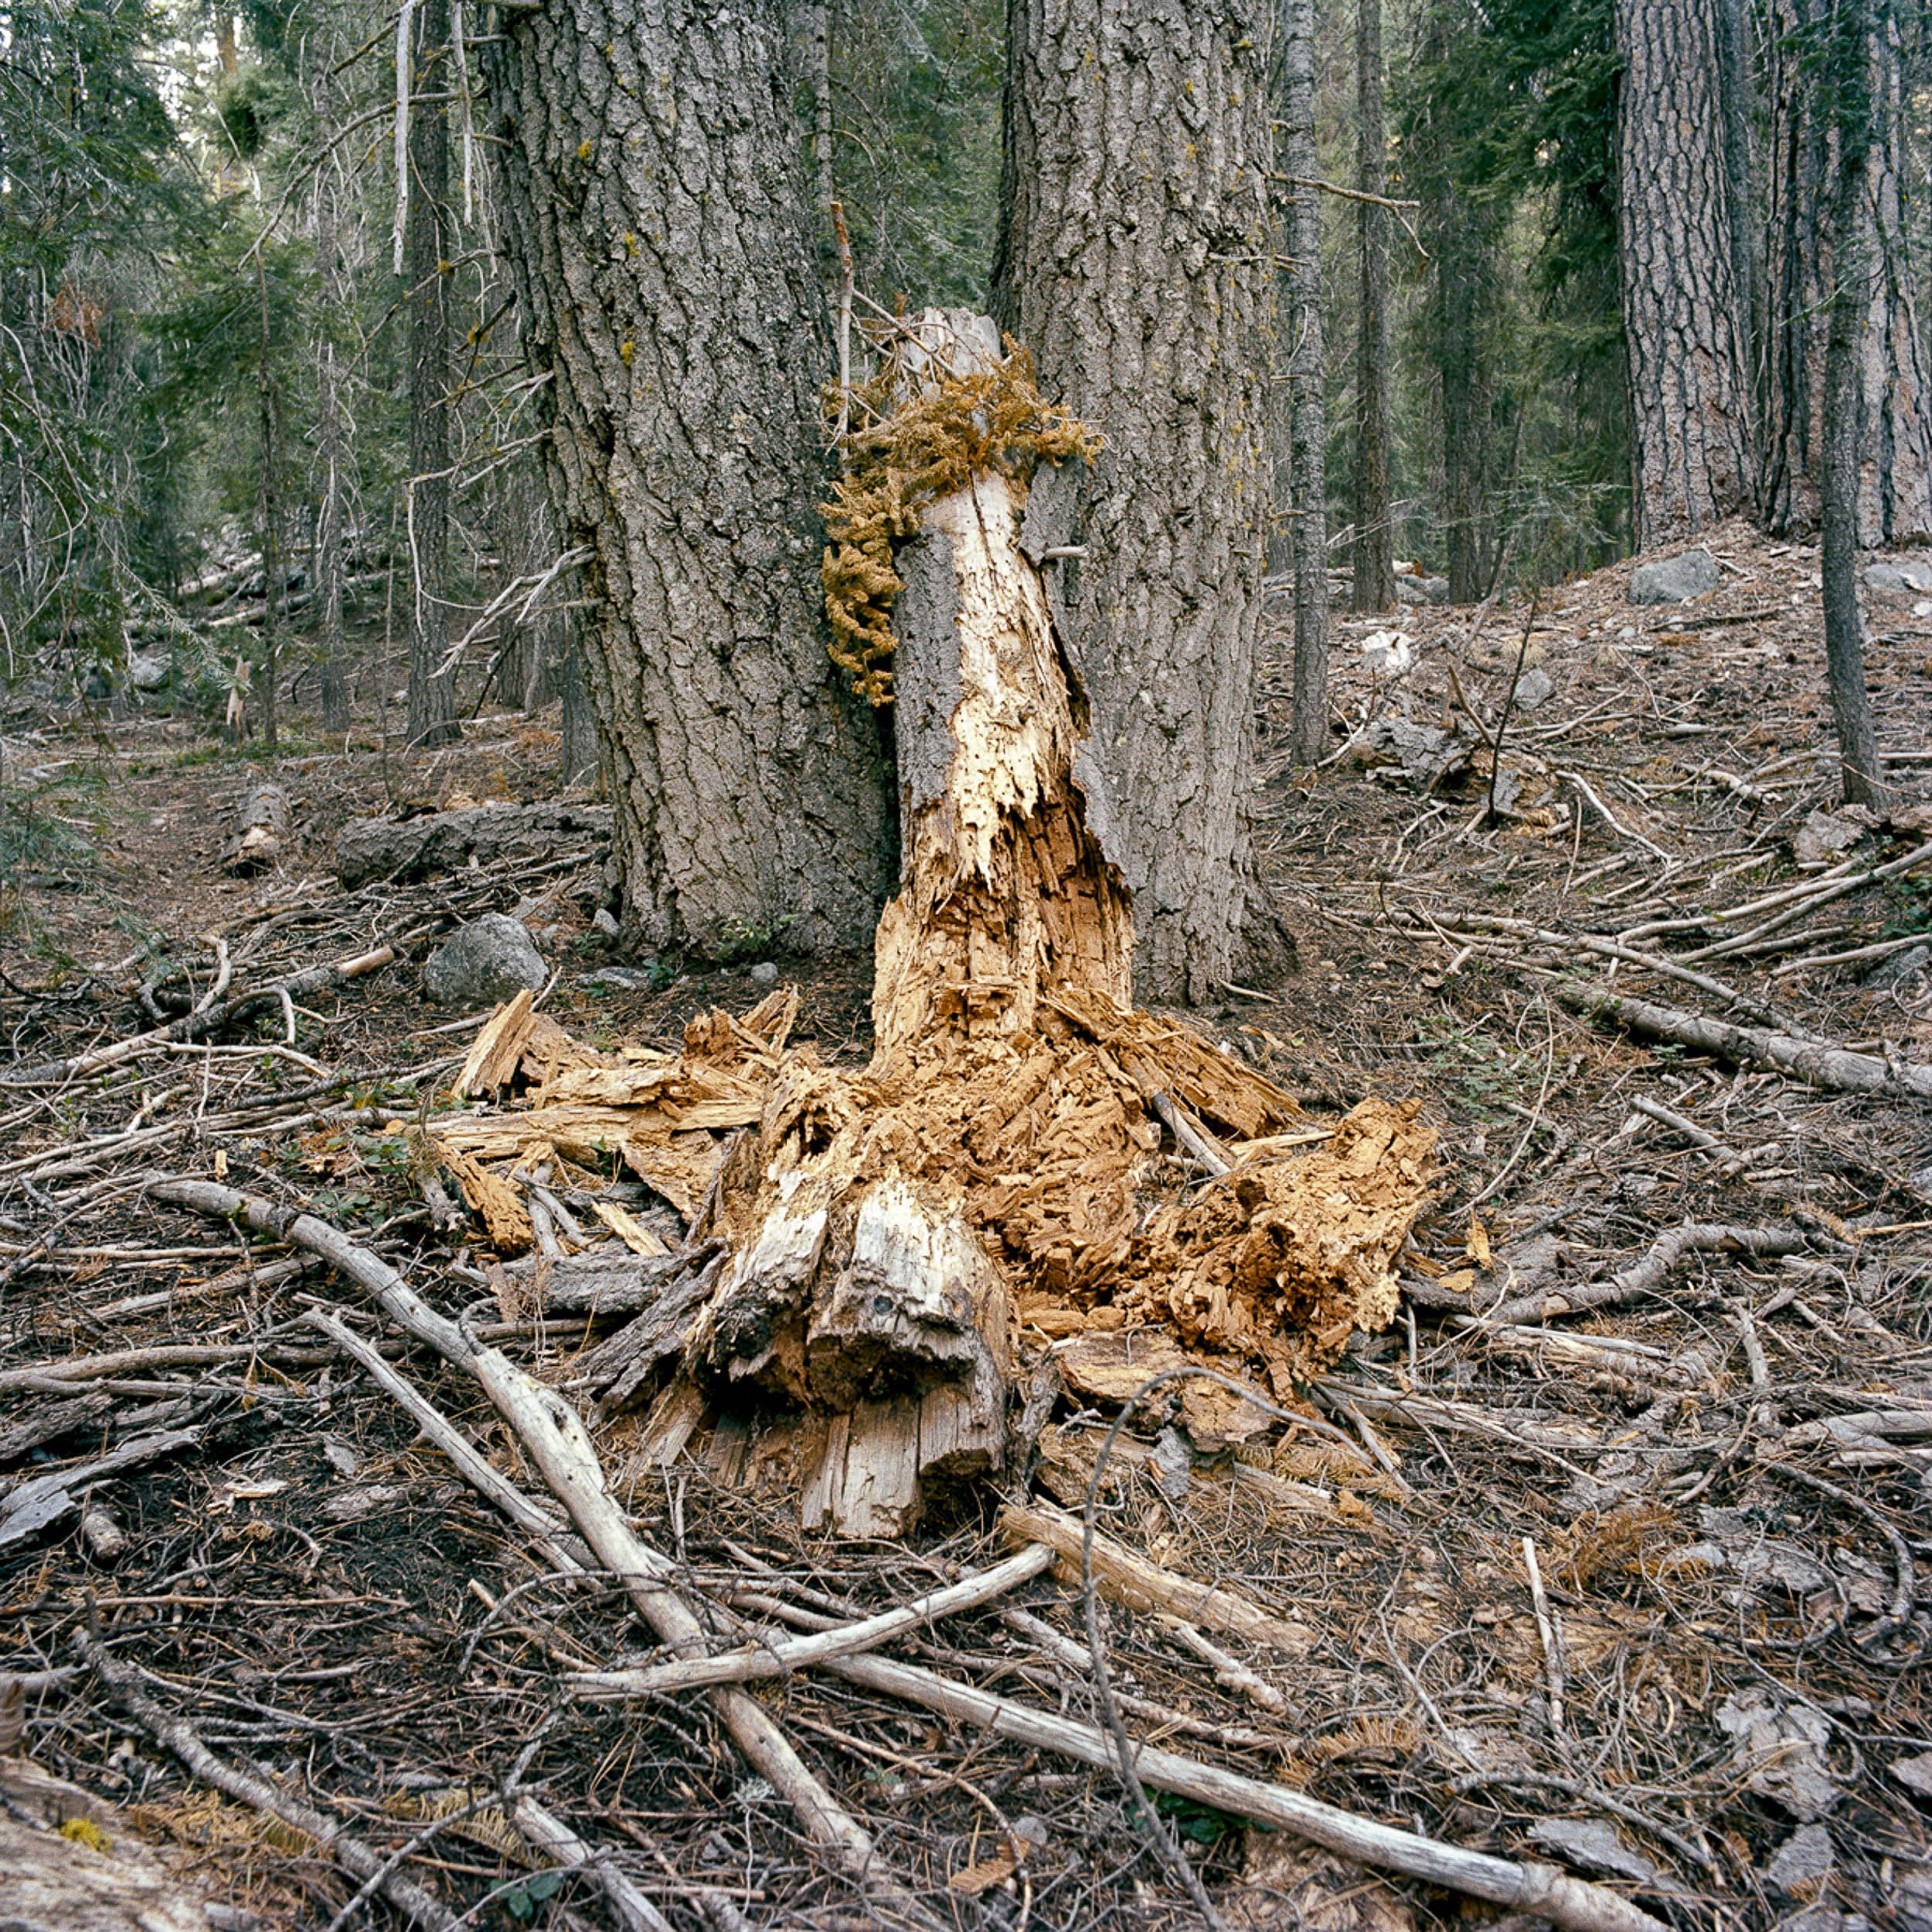   Remains from Bear Searching for Insects, Trinity Alps  